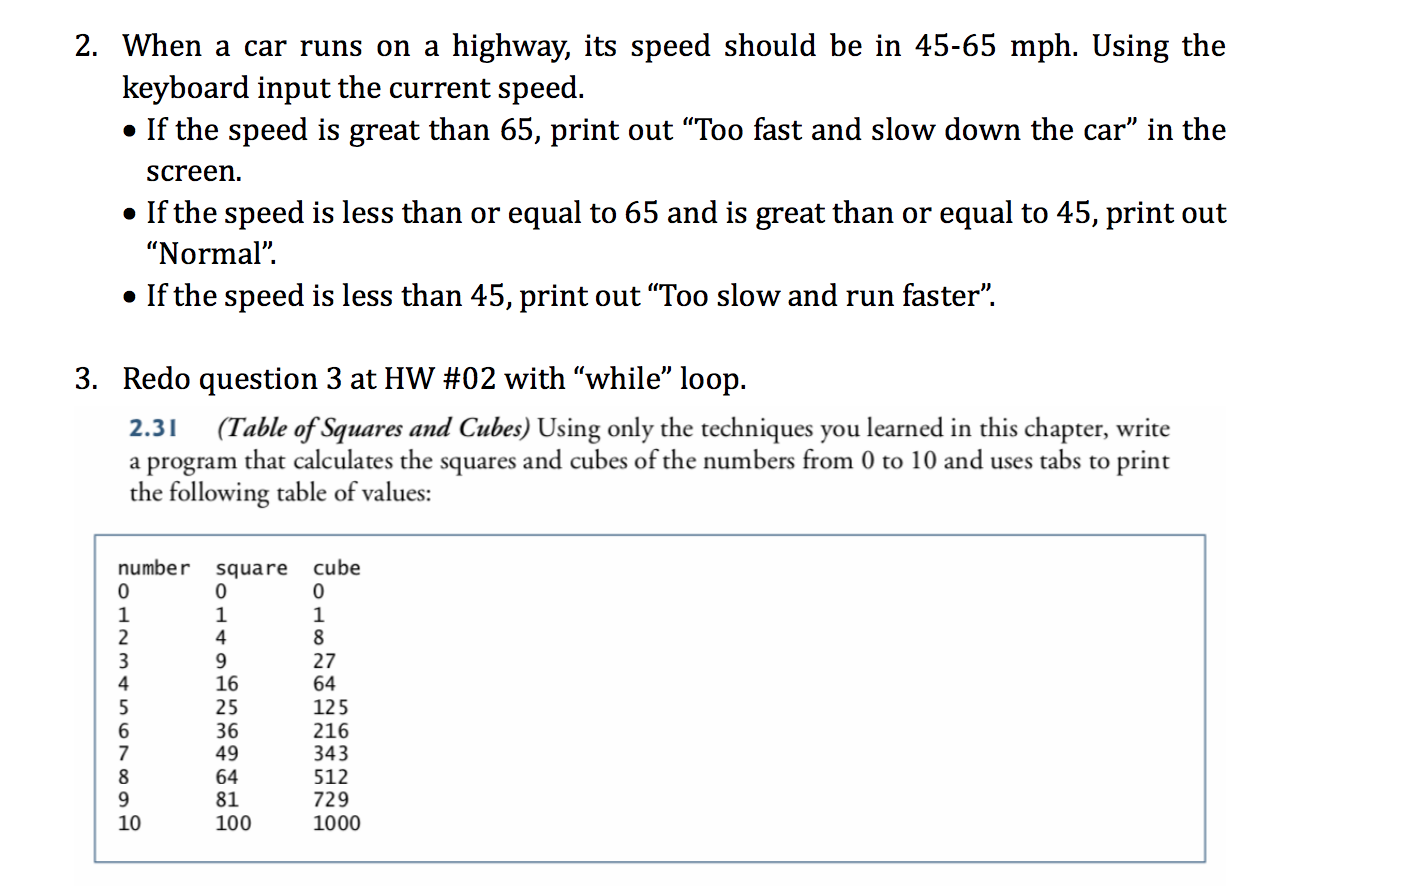 2. When a car runs on a highway, its speed should be in 45-65 mph. Using the
keyboard input the current speed.
• If the speed is great than 65, print out "Too fast and slow down the car" in the
screen.
• If the speed is less than or equal to 65 and is great than or equal to 45, print out
"Normal".
• If the speed is less than 45, print out "Too slow and run faster".
